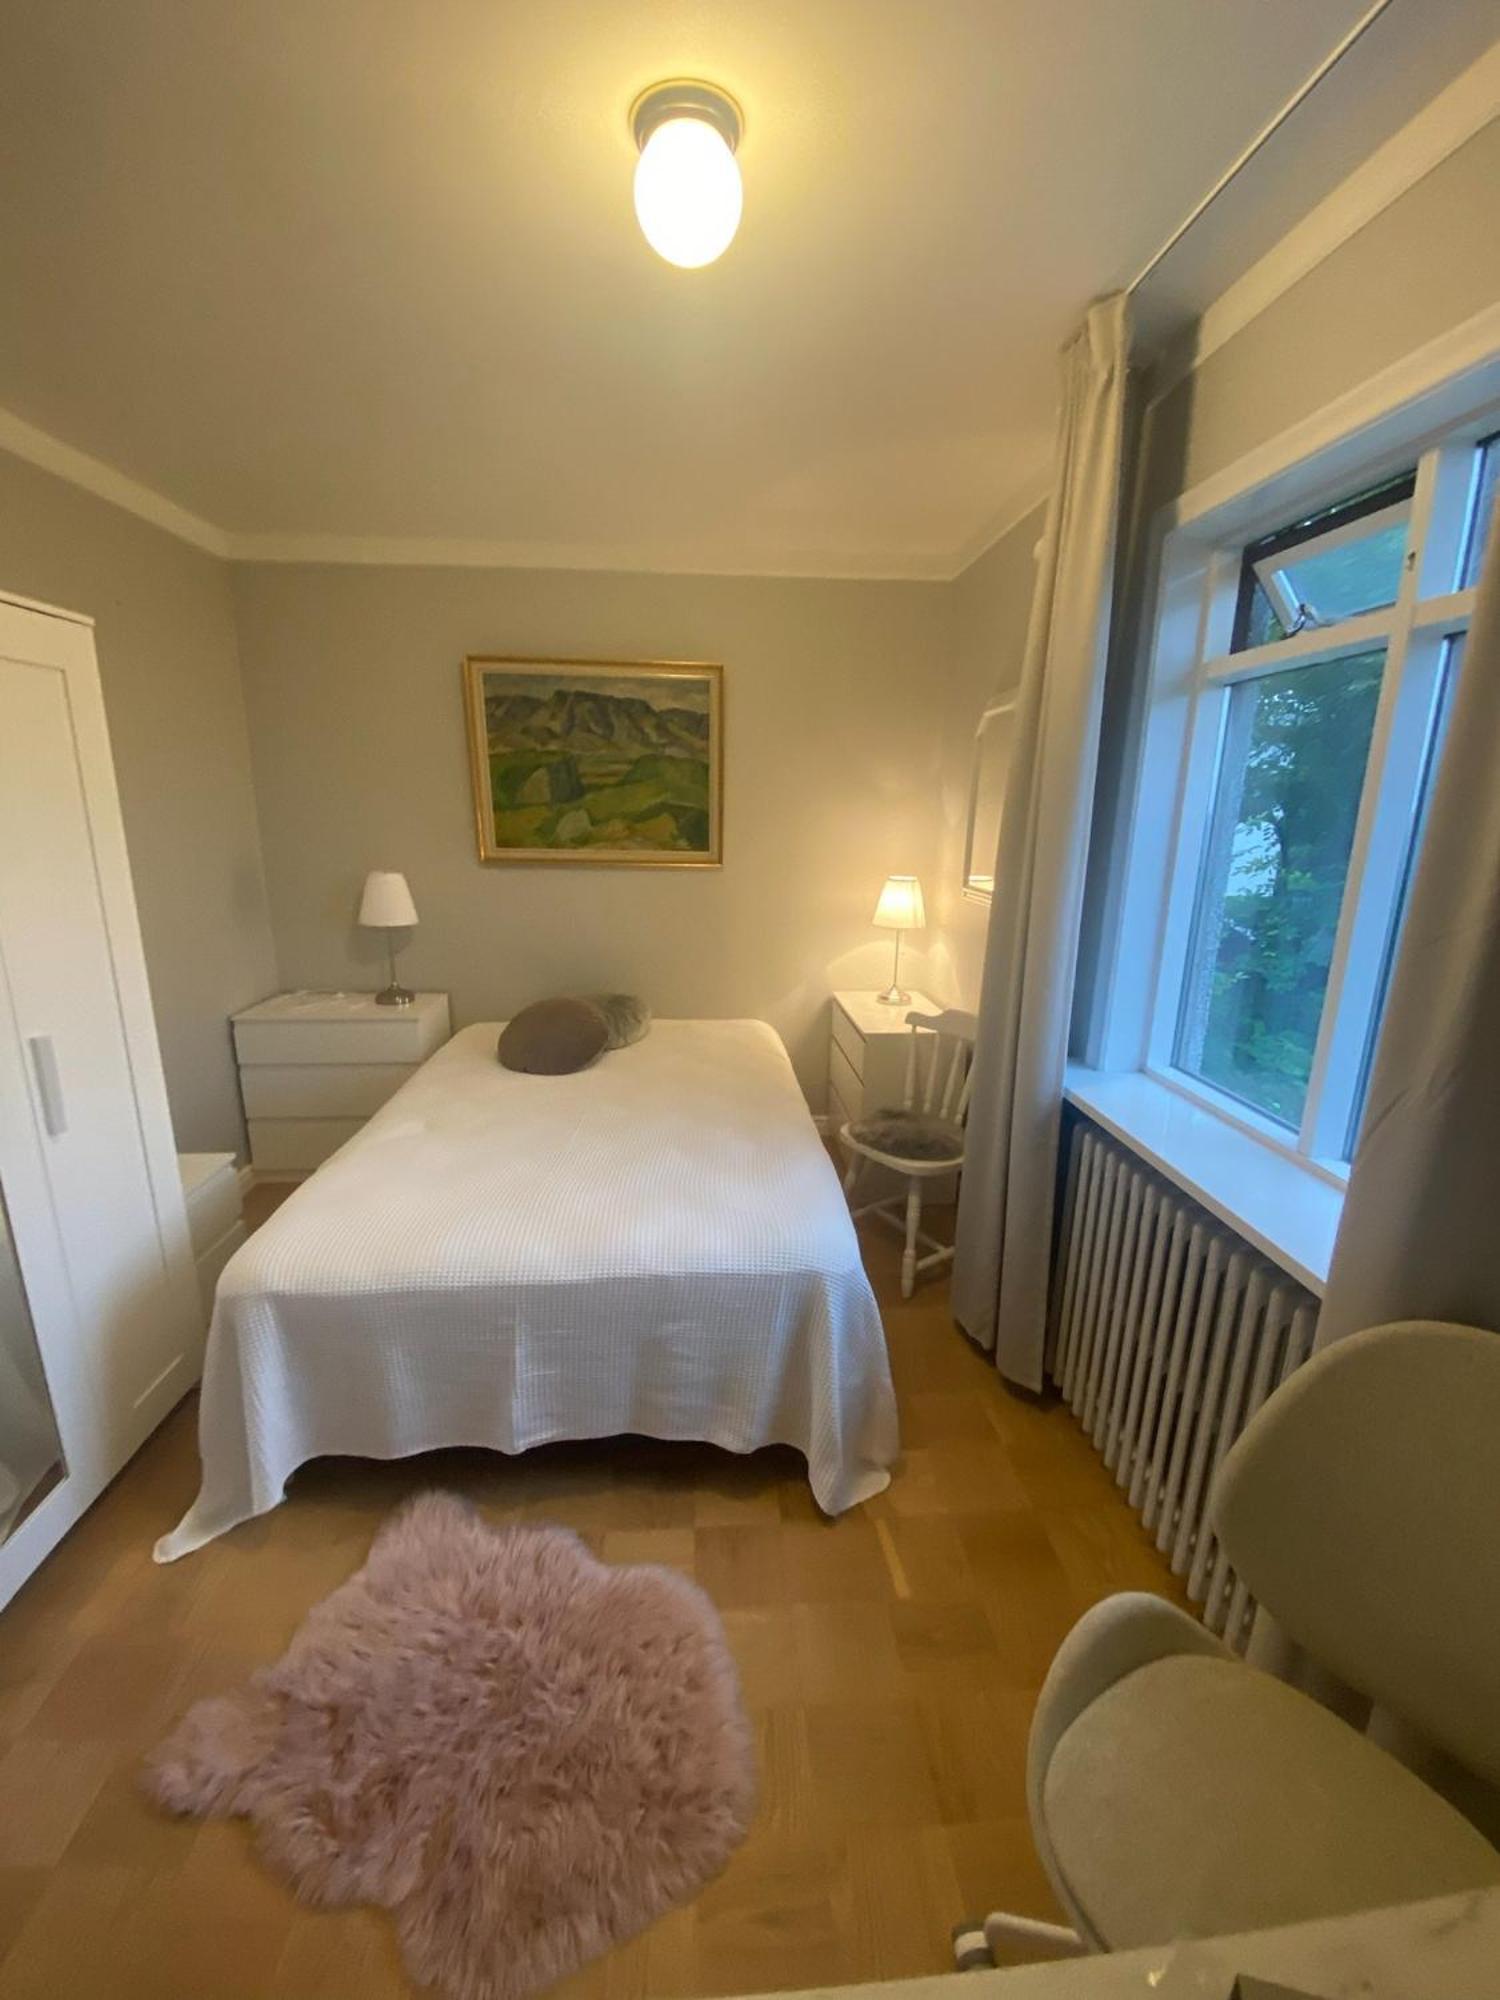 Casa Disa - Dreams, A Boutique Guesthouse In Reykjavik City'S Central Park And Botanical Garden In Laugardalur, Hot-Spring-Valley 外观 照片